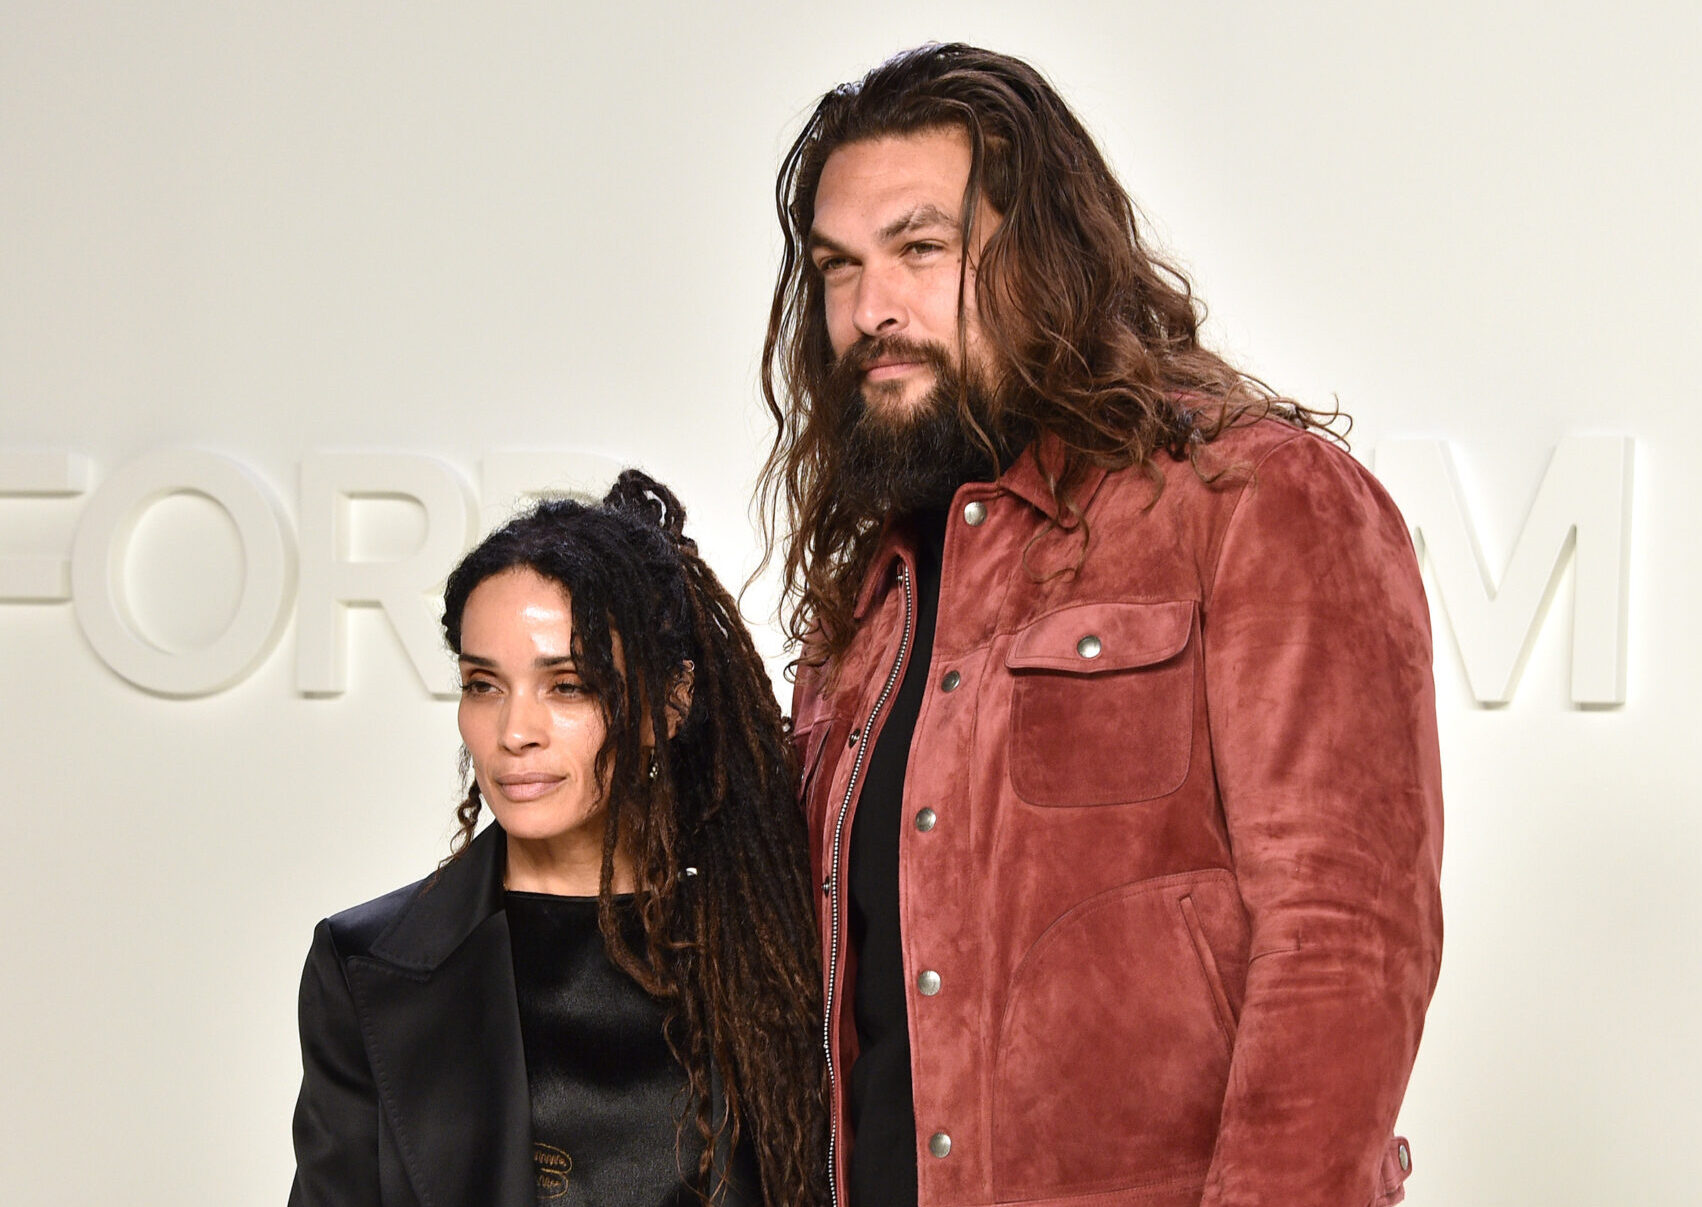 Jason Momoa Reveals He’s Been ‘On the Roam’ with ‘No Home’ Amid Reports ...